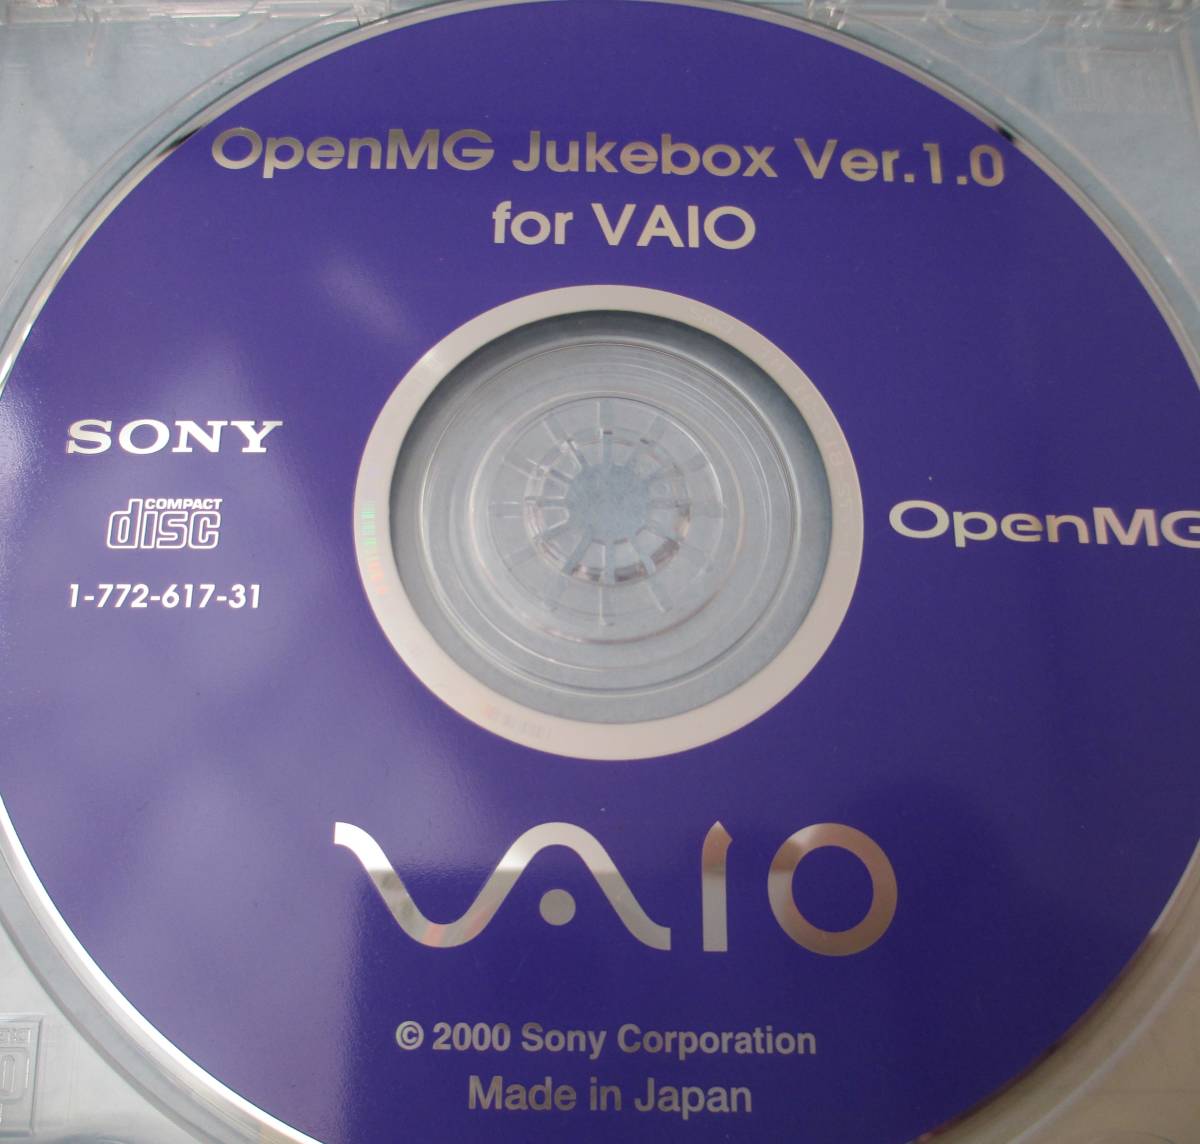 [SONY]VAIO for music compression * data control * repeated . soft OpenMG Jukebox Ver.1.0 (CD-ROMx1 sheets )